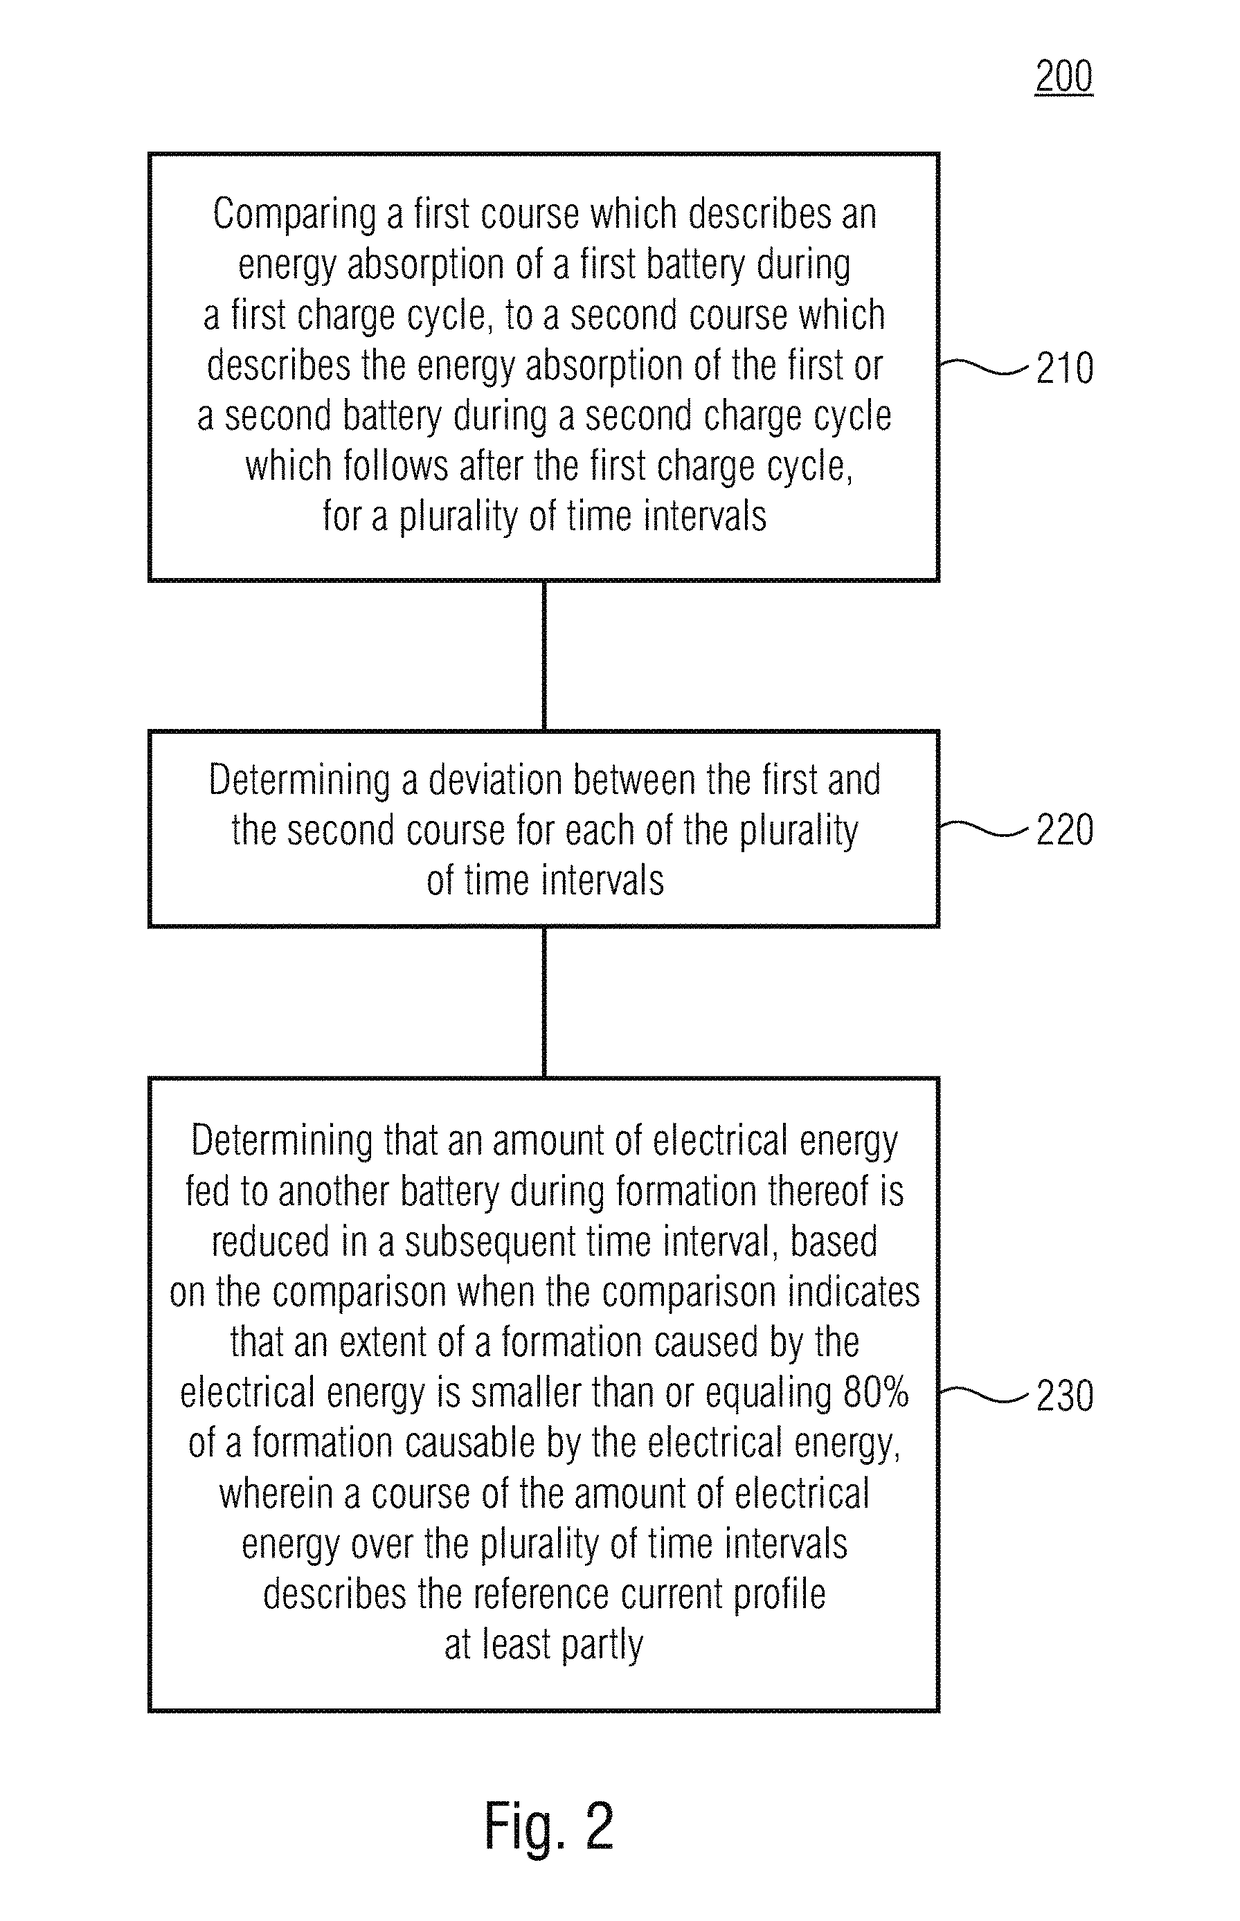 Method for determining a reference energy profile and device for forming a battery